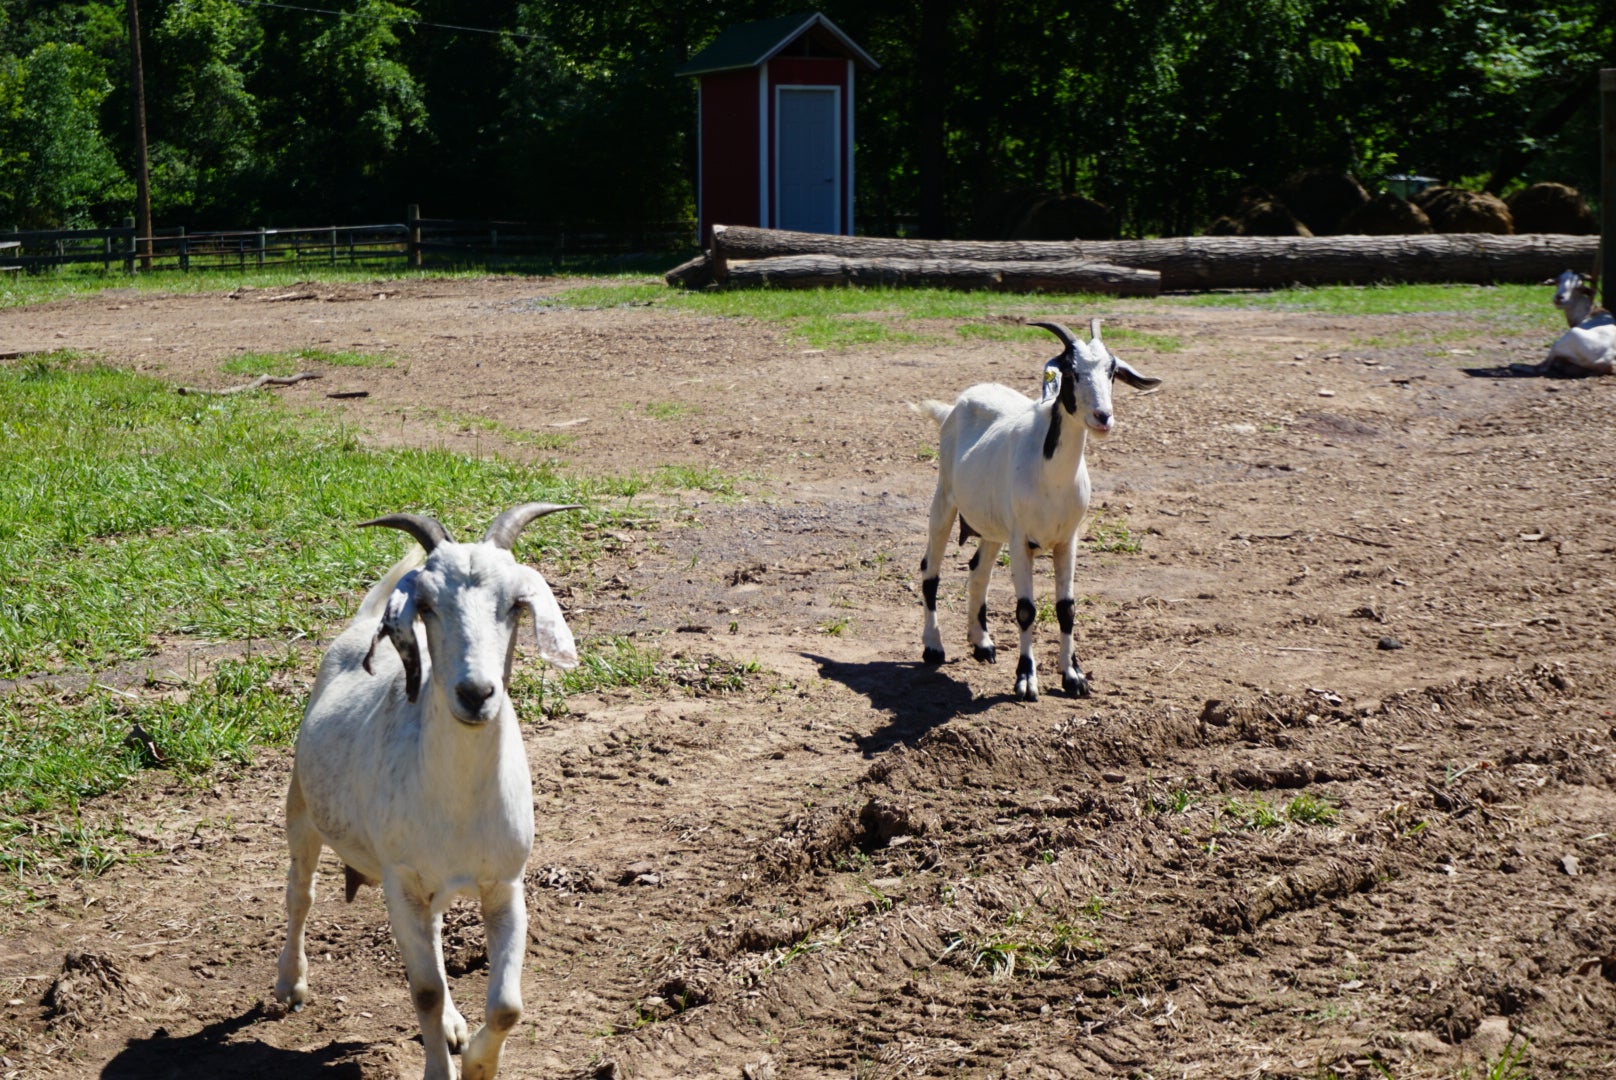 Goats are often seen walking around the camp grounds. They seemed pretty friendly. The baby ones are really cute!